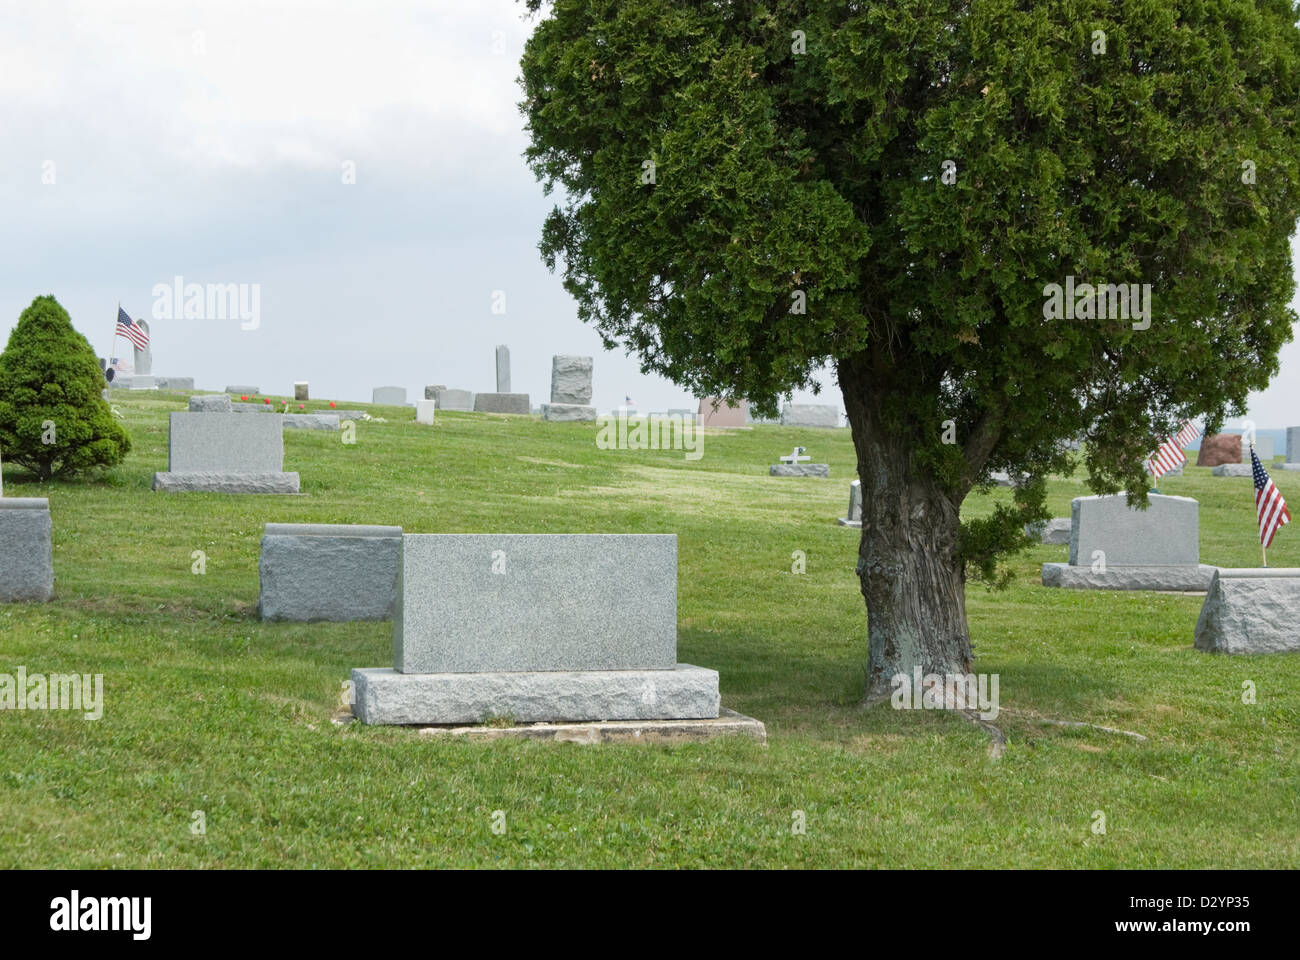 Stock photo of blank cemetery headstones in summer graveyard, ready to add your own text. Stock Photo